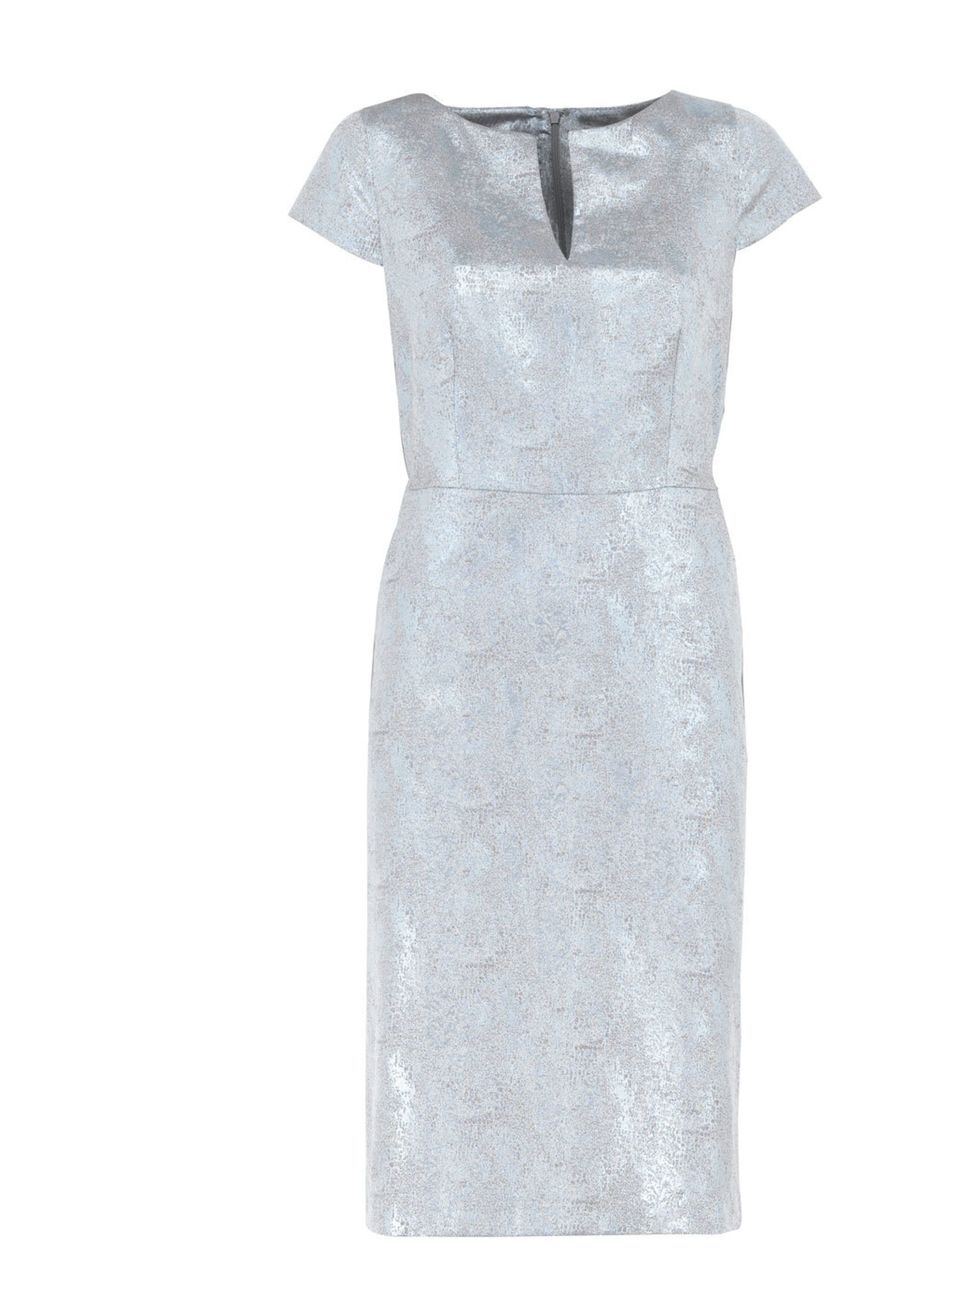 <p>Crisp, cosmic metallics are bang on-trend for spring so good old M&amp;S has come up with a wearable solution with this chic dress... <a href="http://www.marksandspencer.com/Autograph-Henley-Neck-Brocade-Dress/dp/B006WUOUFI">Marks &amp; Spencer</a> met